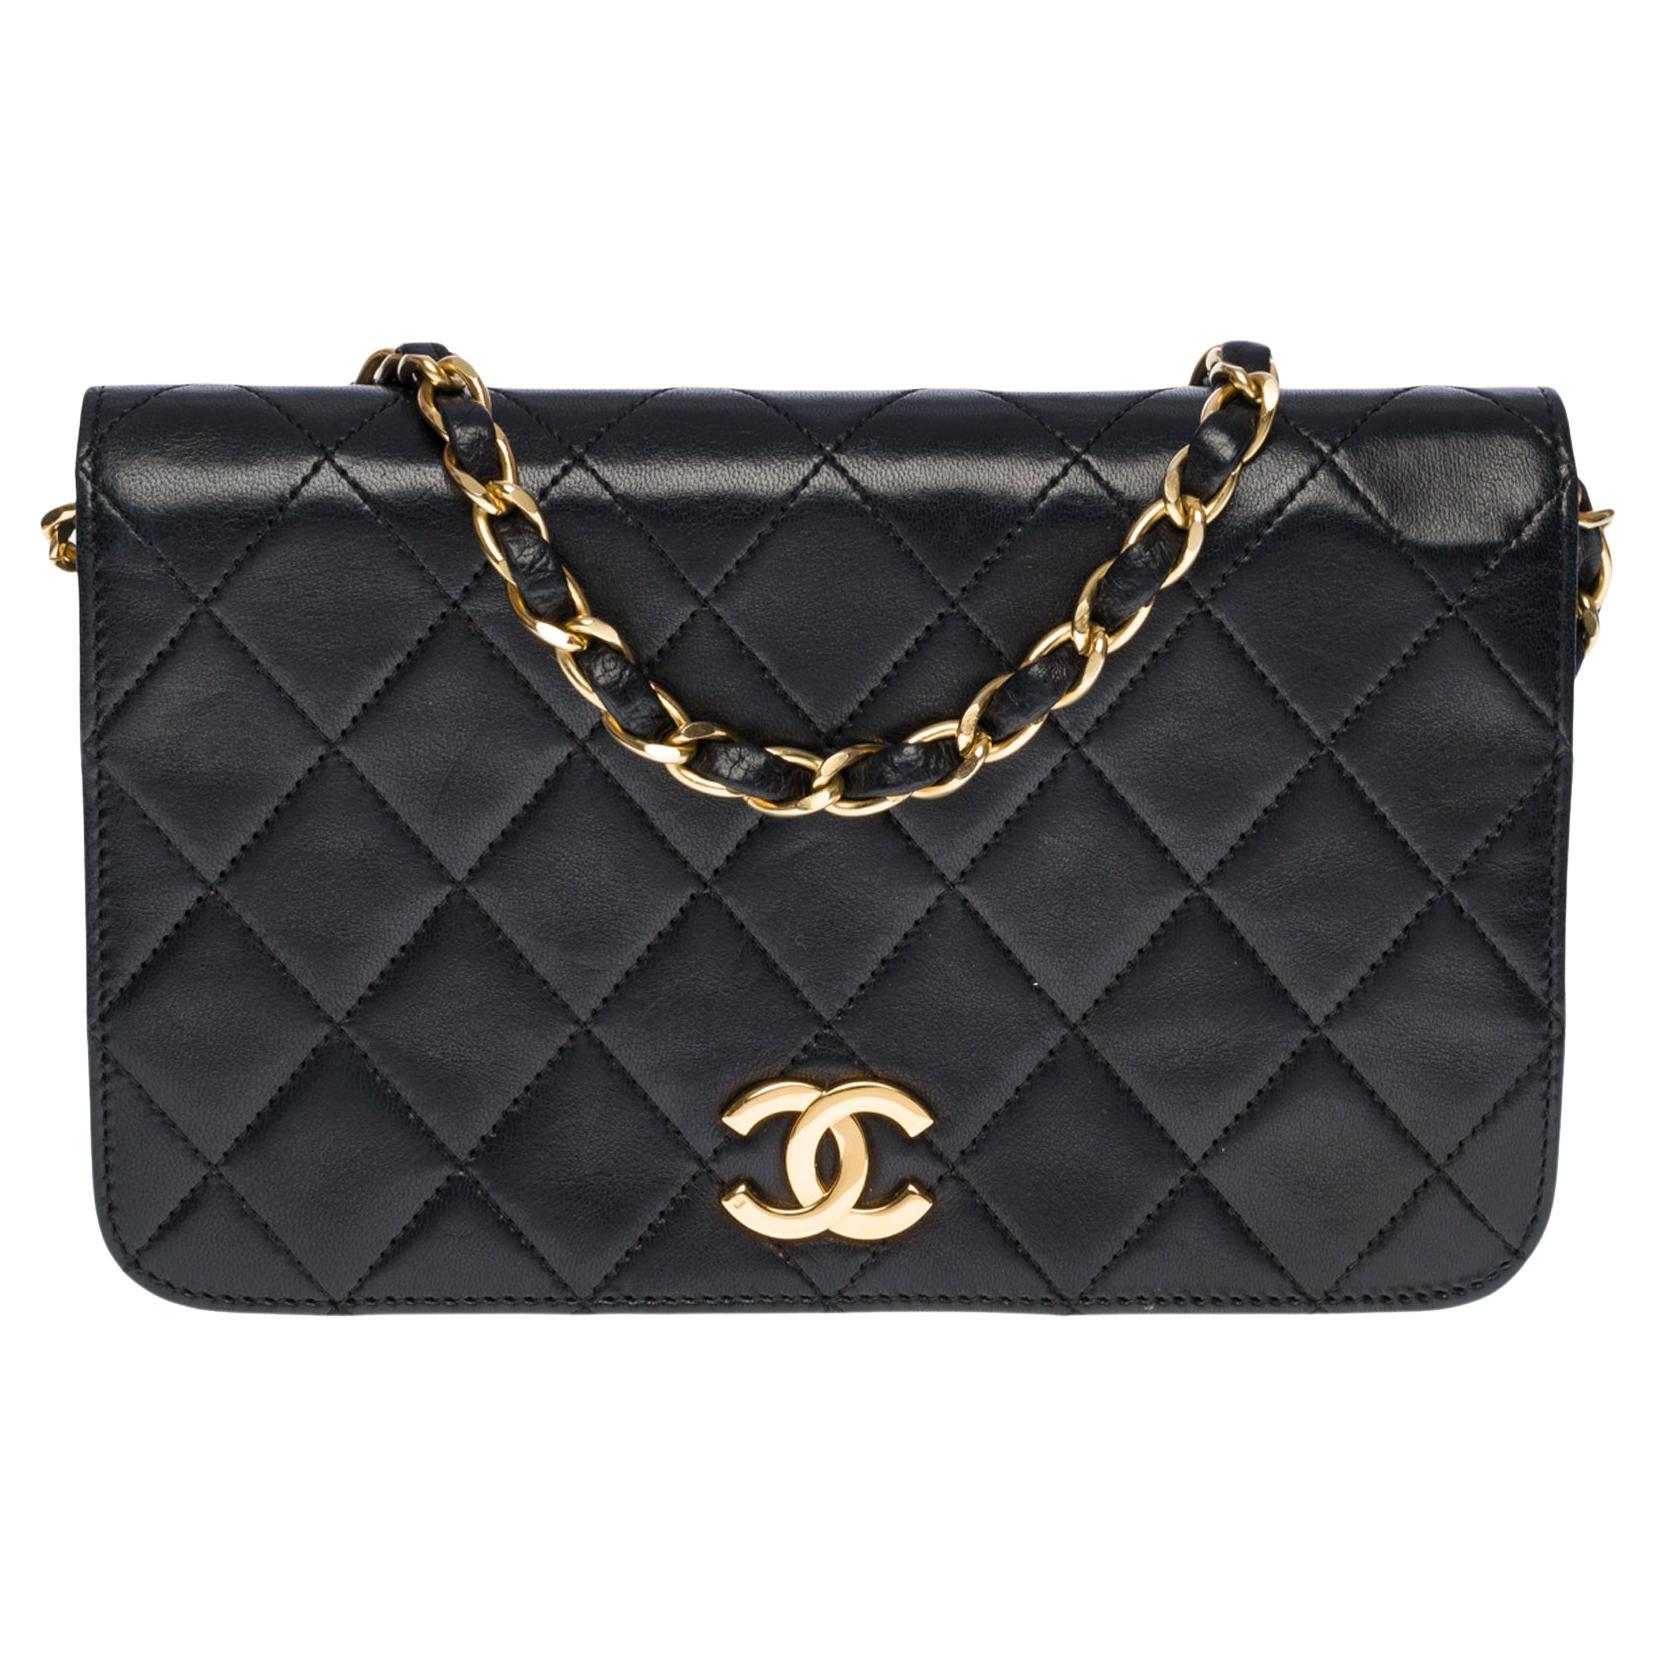 Chanel Classic Mini Full Flap shoulder bag in black quilted leather and GHW